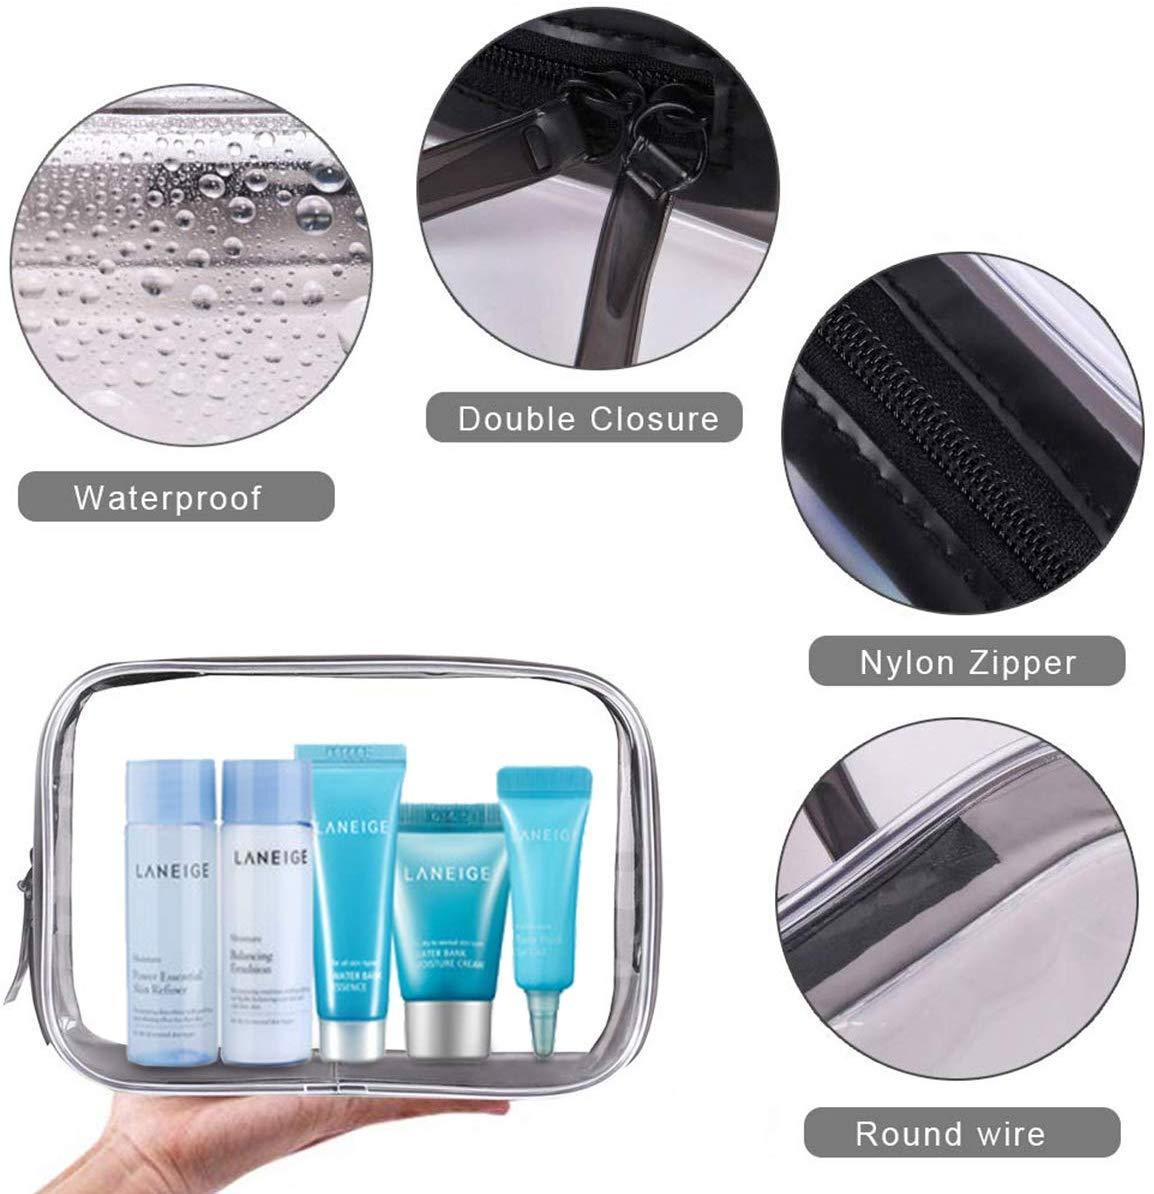 Makeup Bag Clear Pvc Cosmetic Bag Round Travel Bag Toiletry Carry